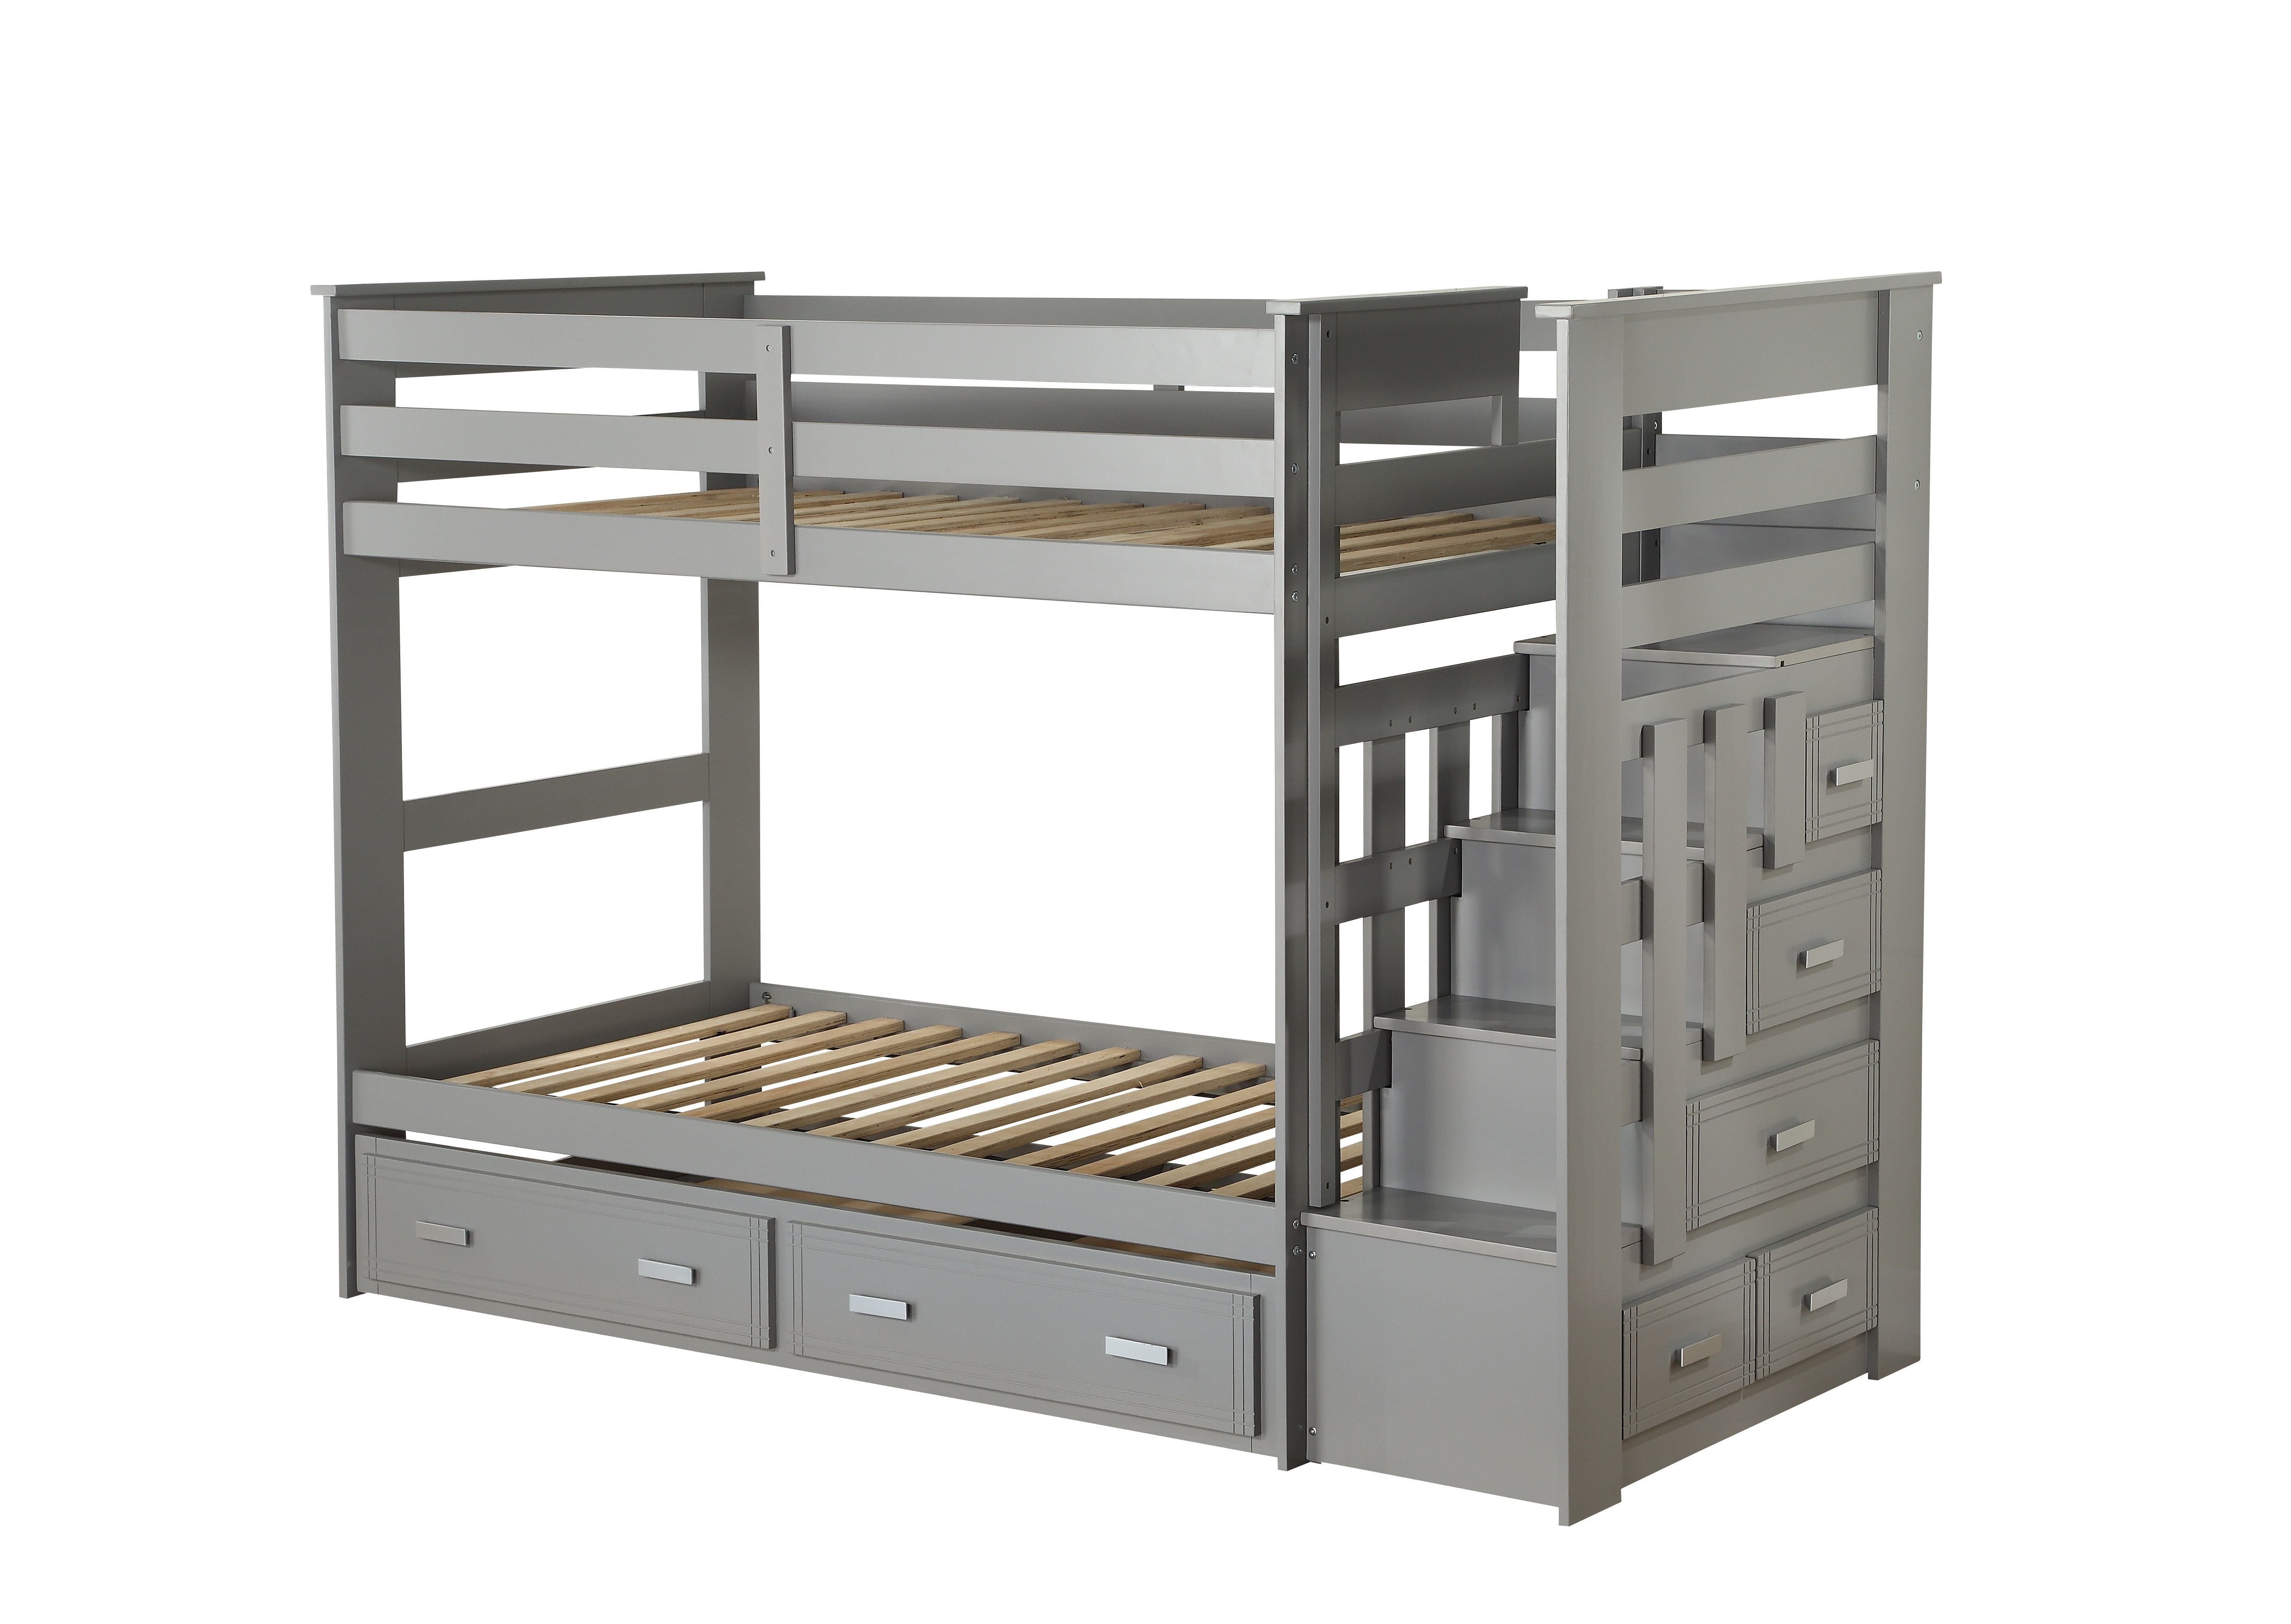 ACME Allentown Twin-Over-Twin Size Bunk Bed Frame with Trundle Bed, Storage Drawers, and Wooden Slats Support, No Spring Box Required (Frame Only) - Gray